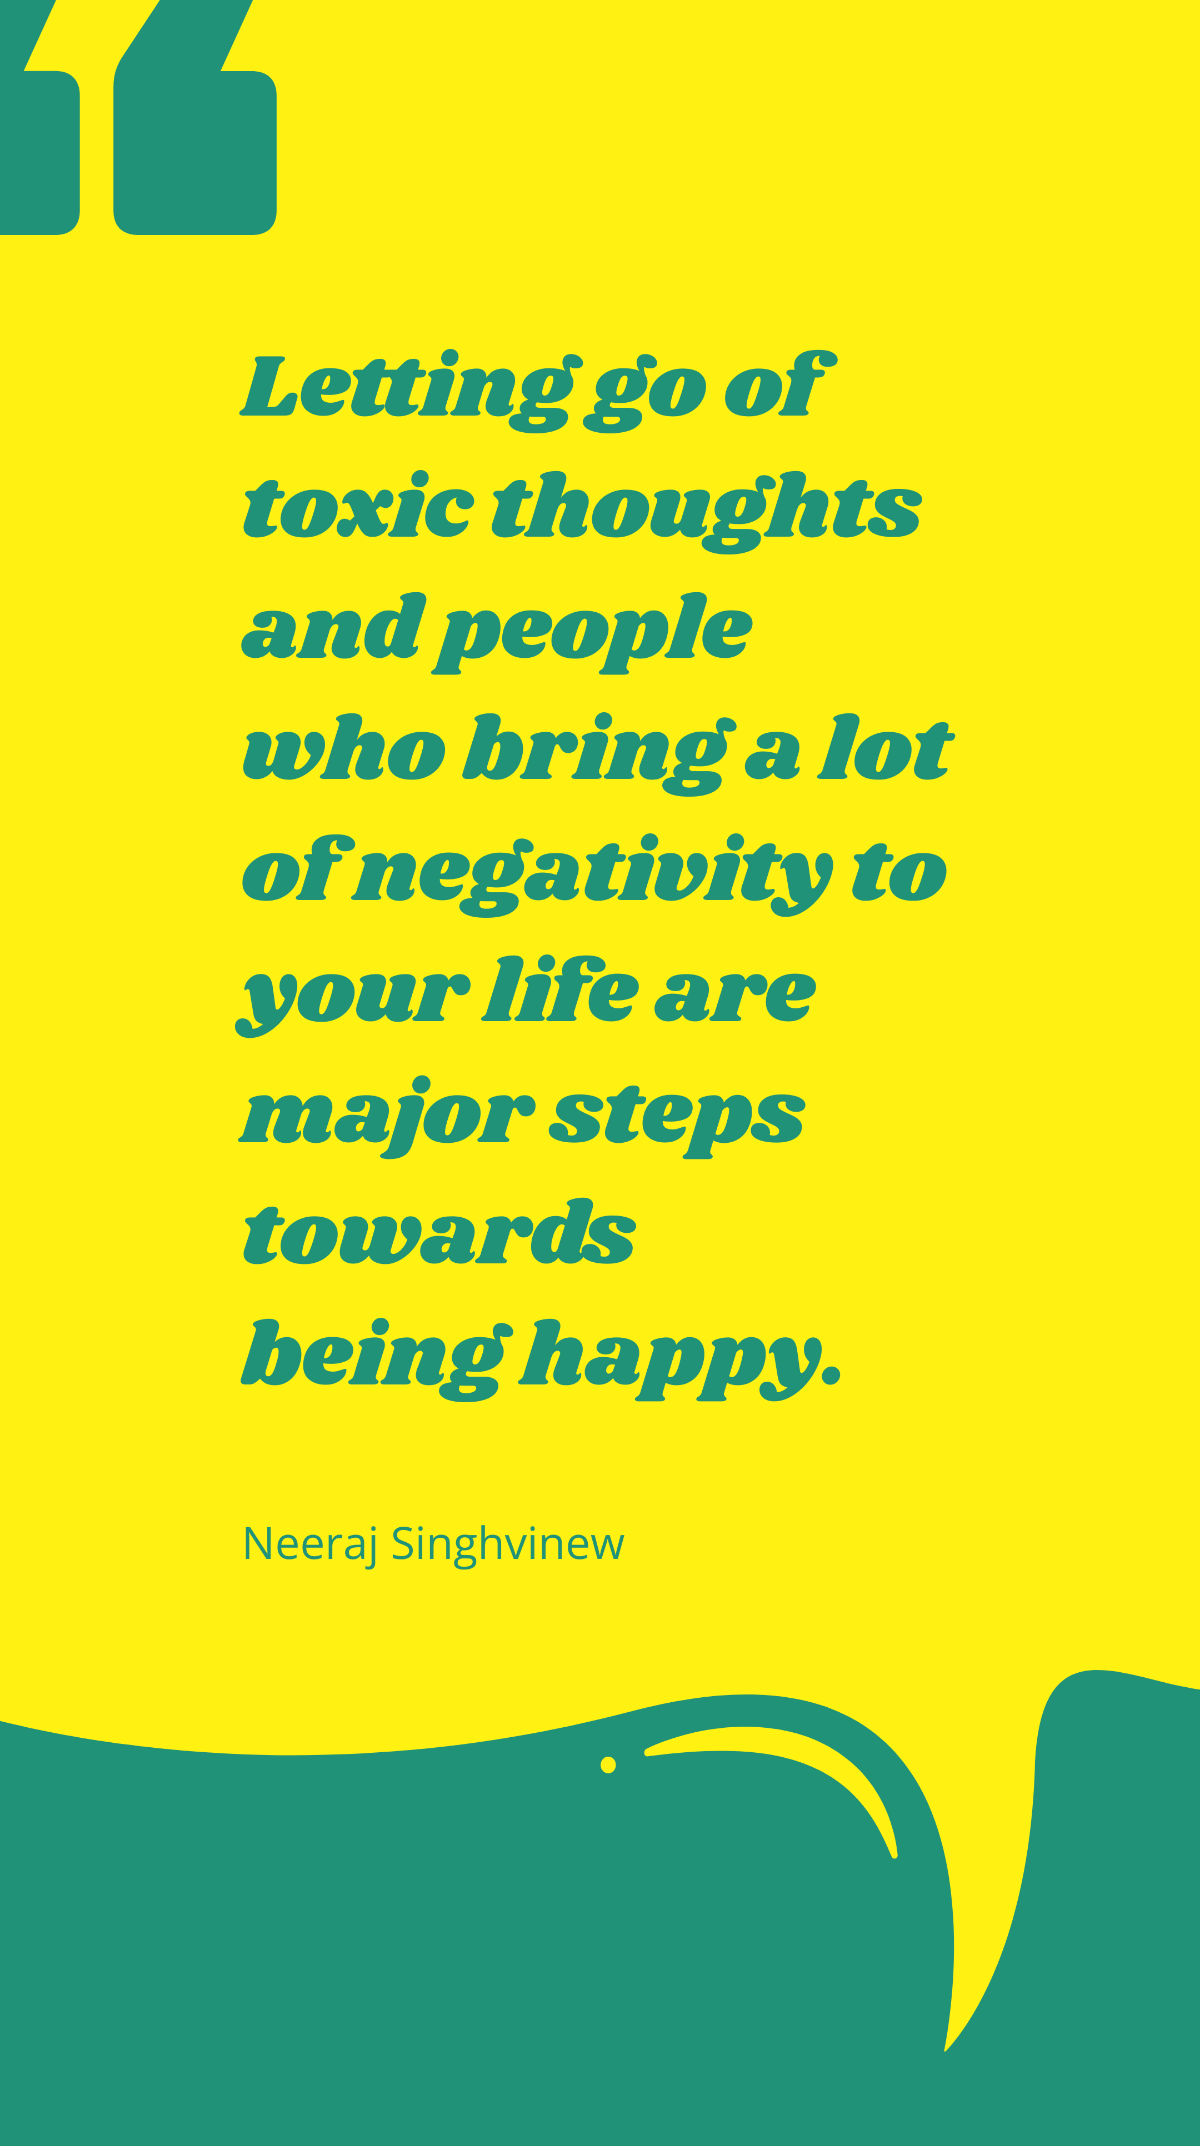 Neeraj Singhvinew - Letting go of toxic thoughts and people who bring a lot of negativity to your life are major steps towards being happy. Template